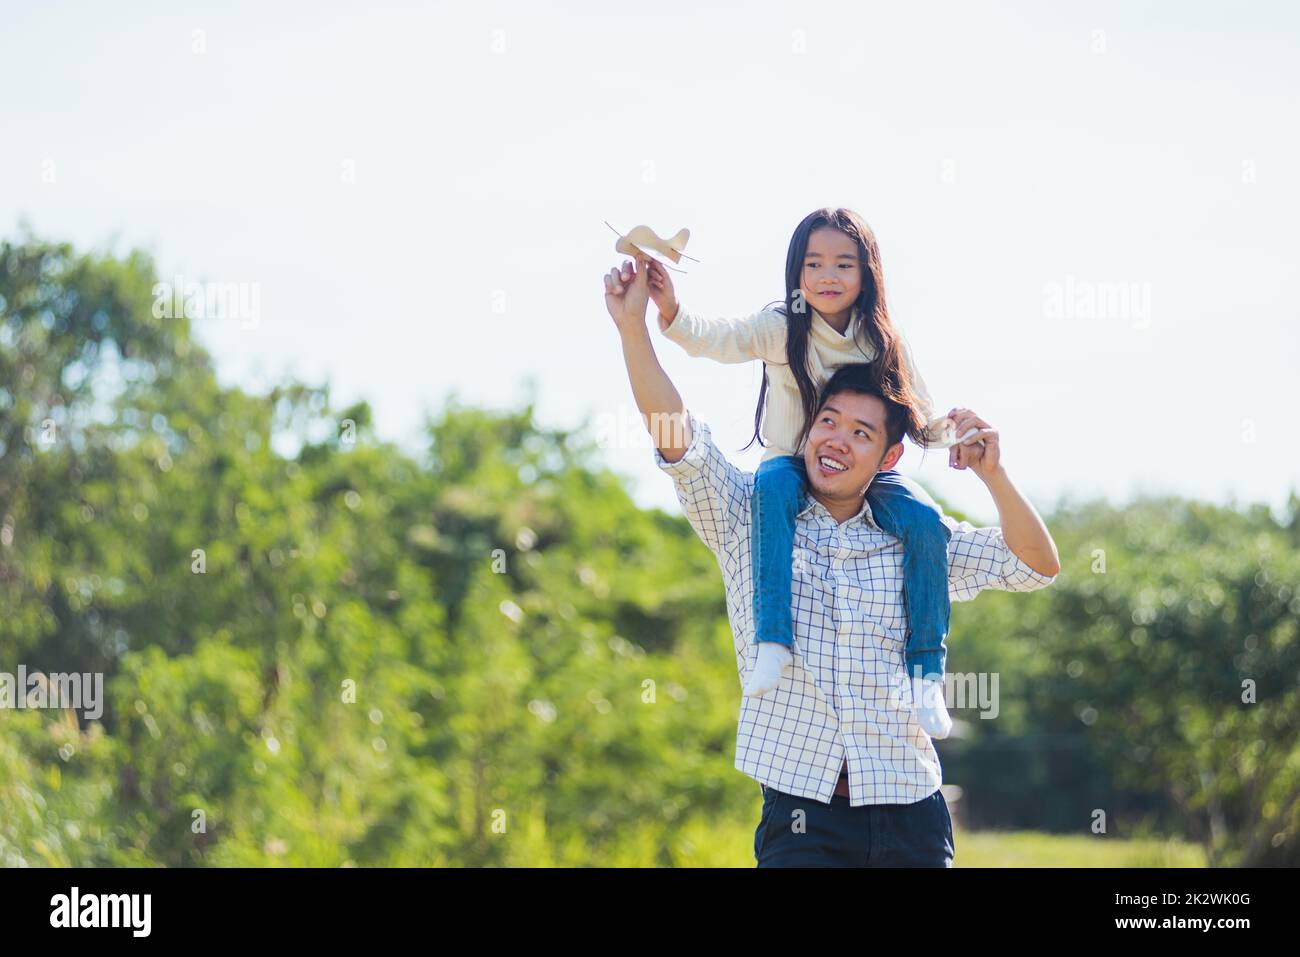 father and carrying an excited girl on shoulders having fun and enjoying outdoor lifestyle together playing aircraft toy Stock Photo